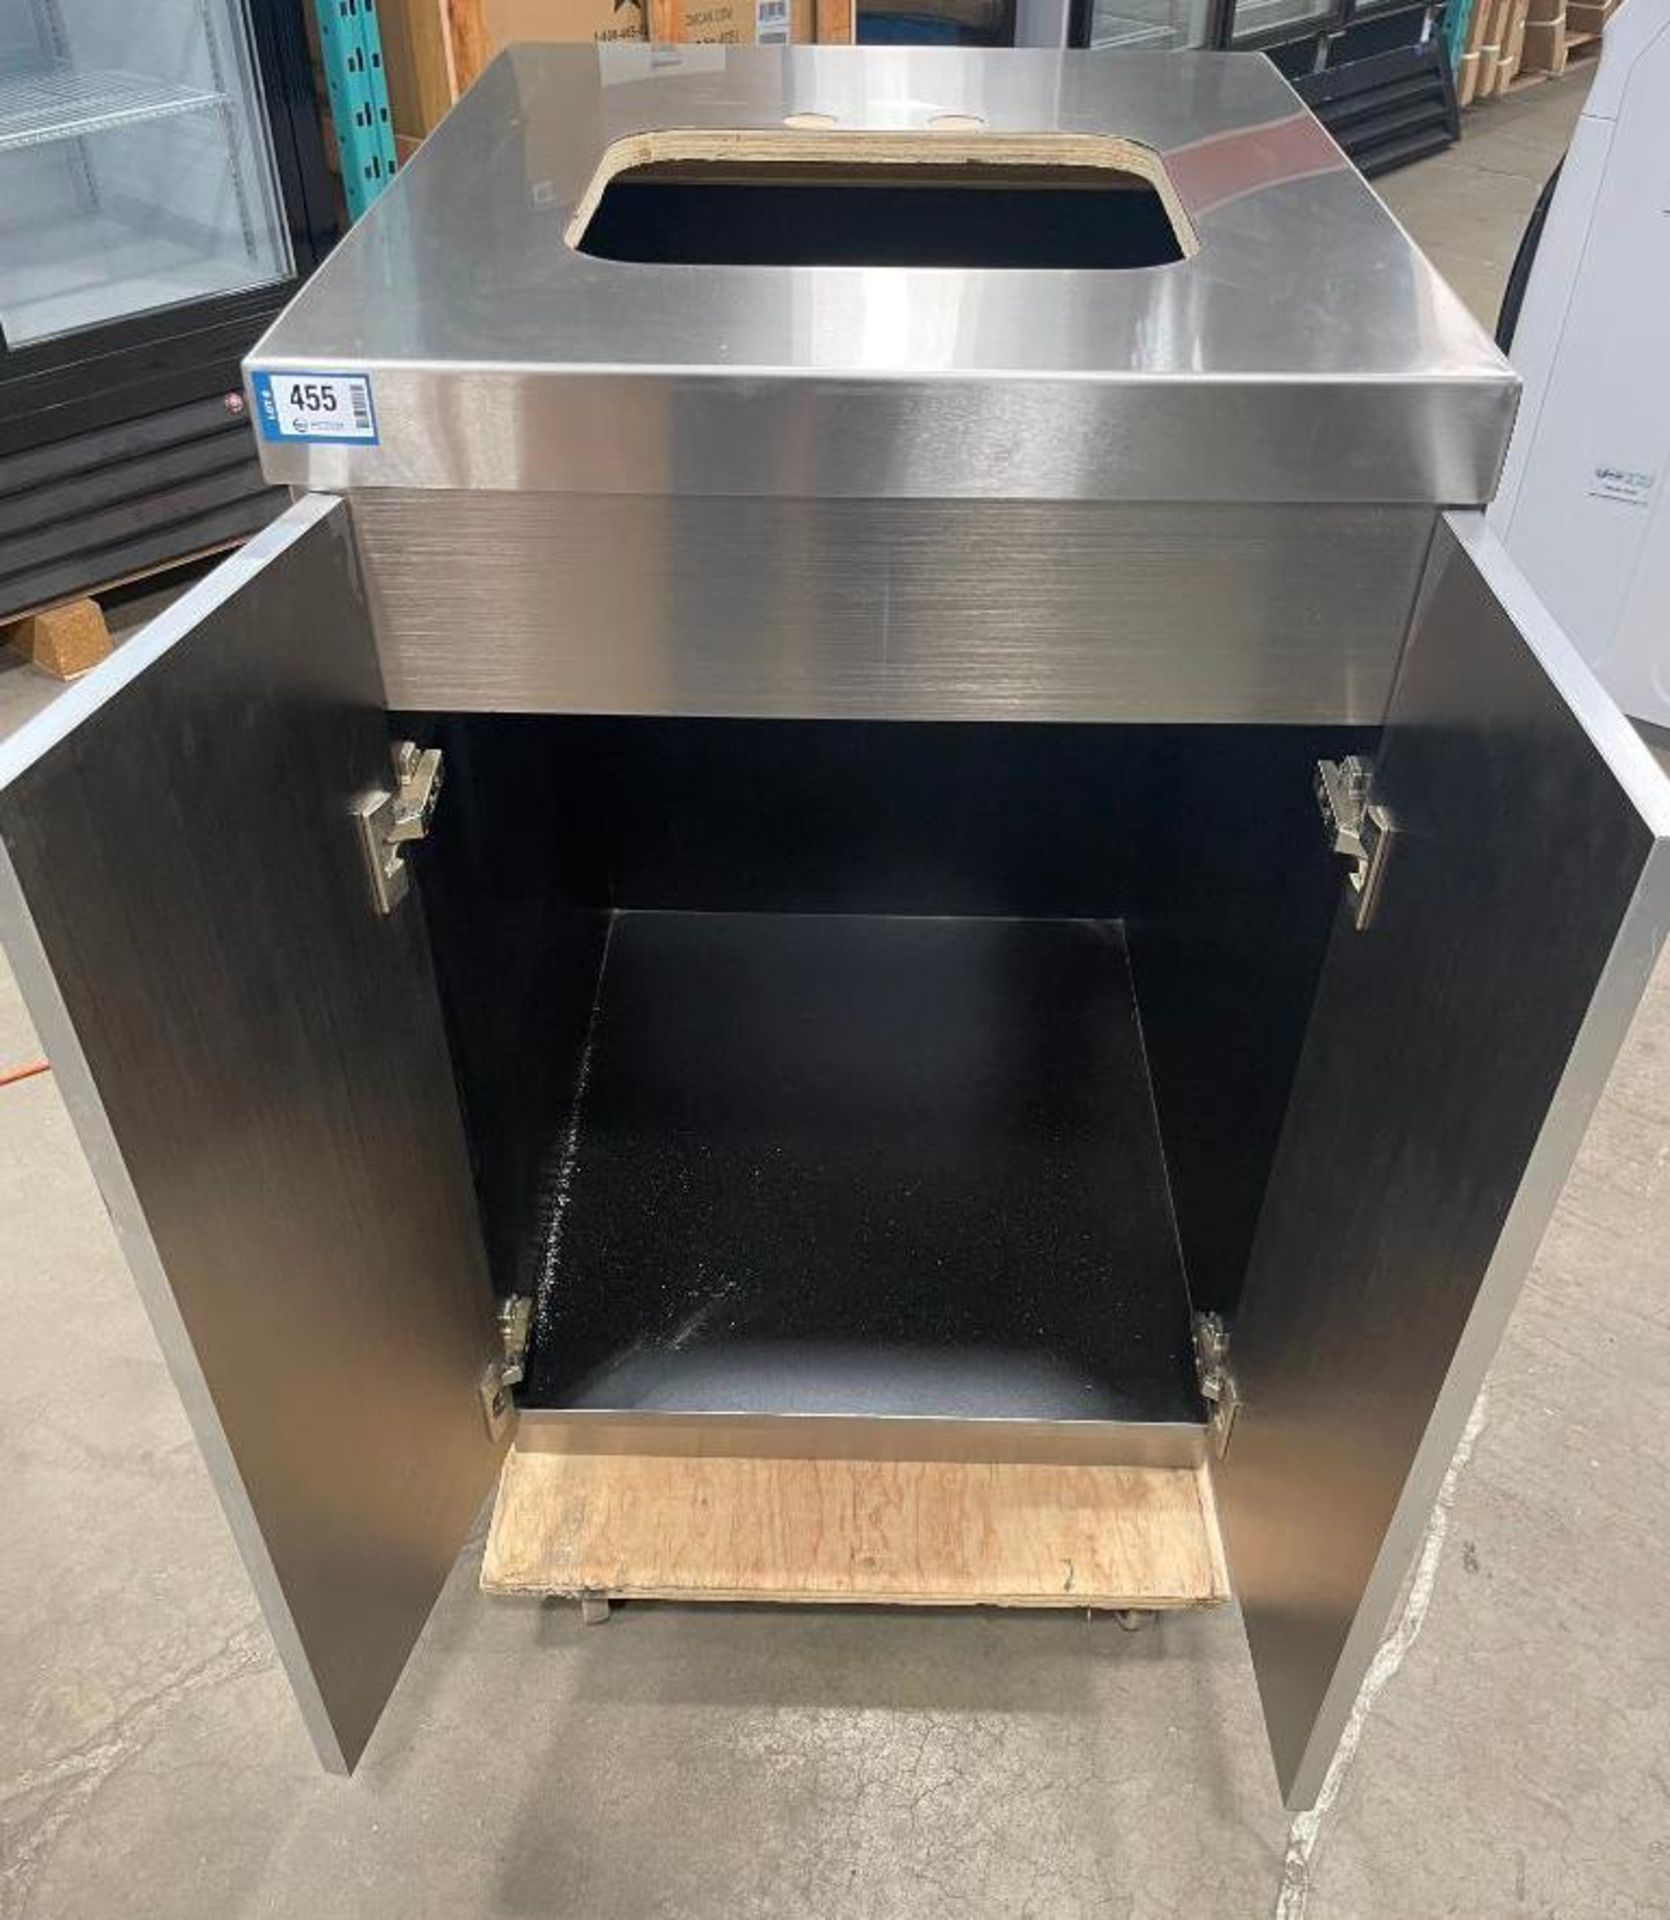 STAINLESS STEEL SINK CABINET